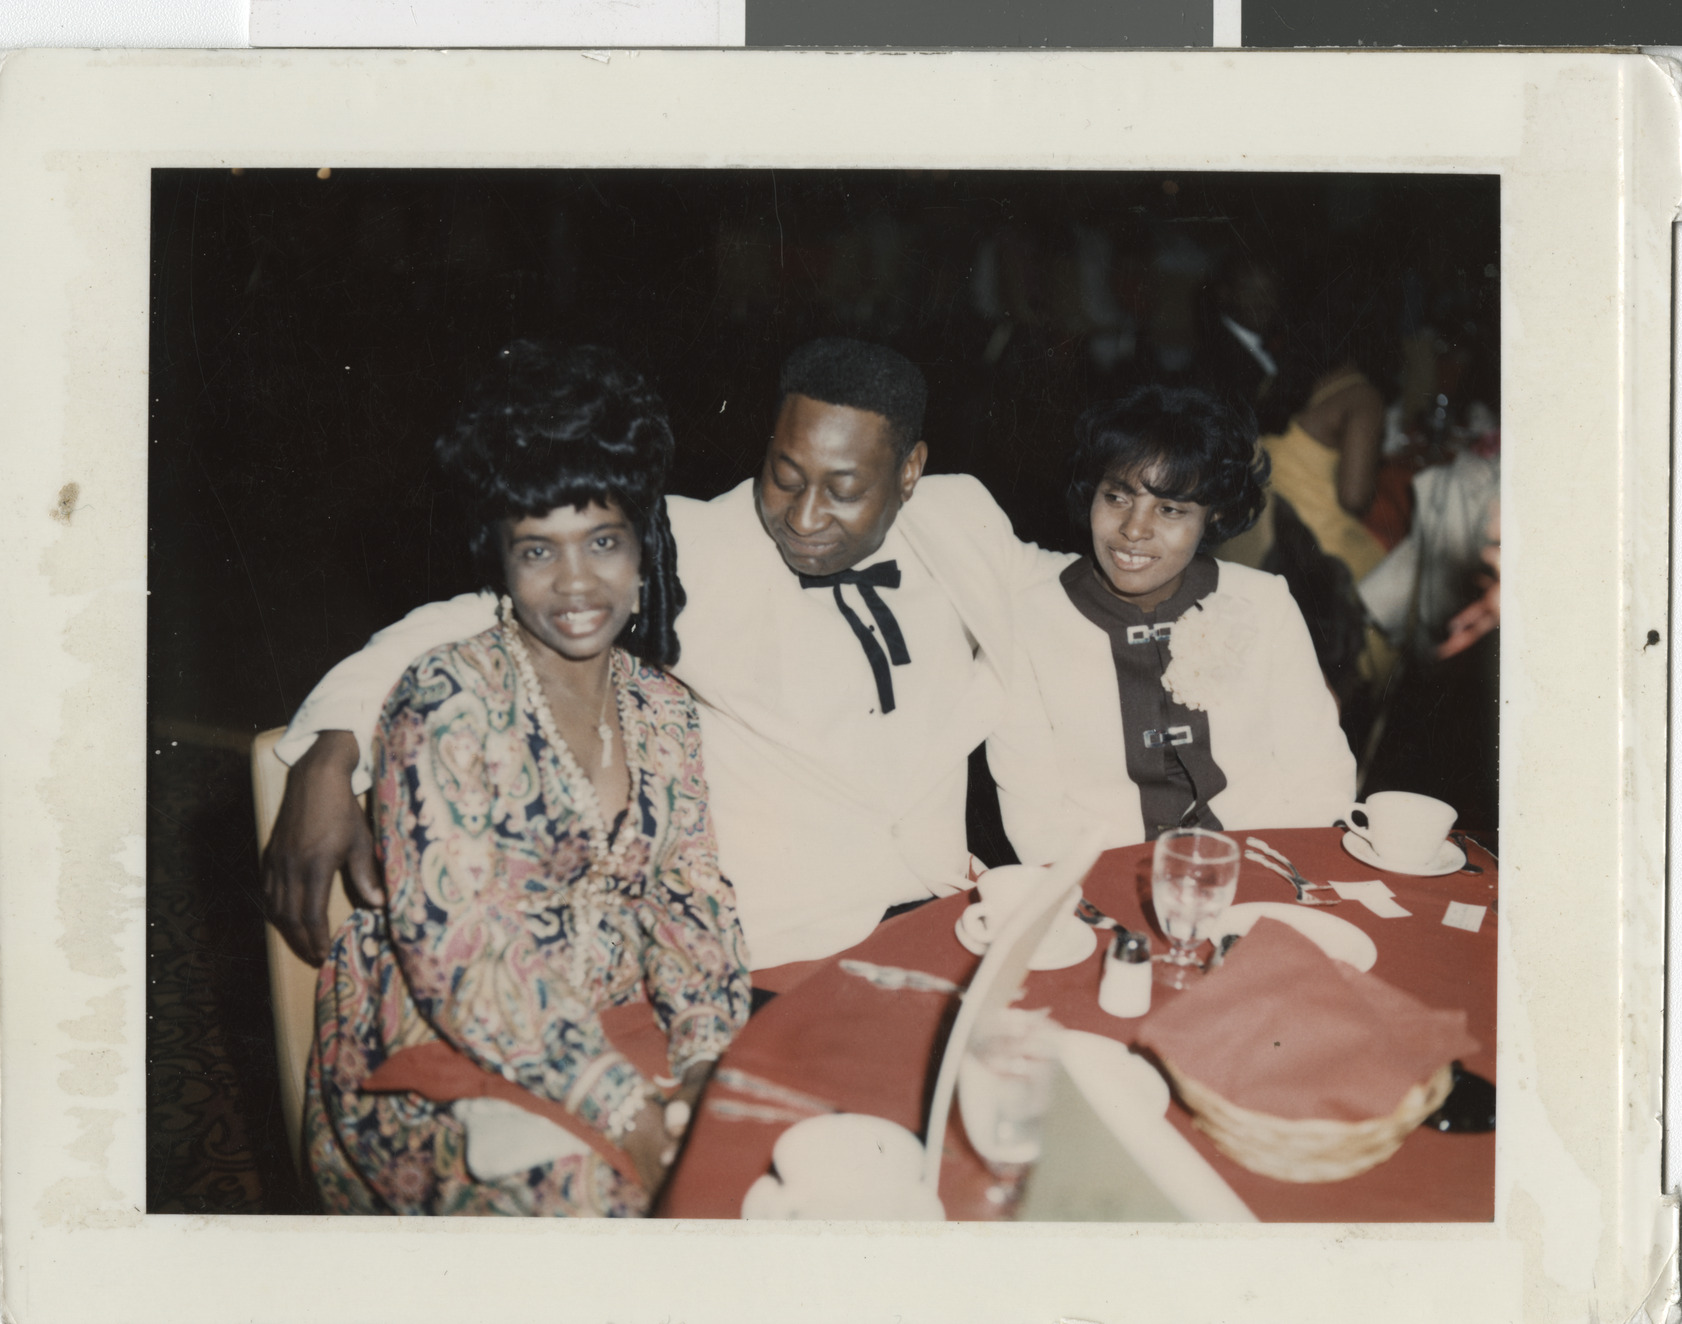 Color polaroid photograph mounted on board of Sweetie , Coye King and Ruby (right) at the Moulin Rouge, no date